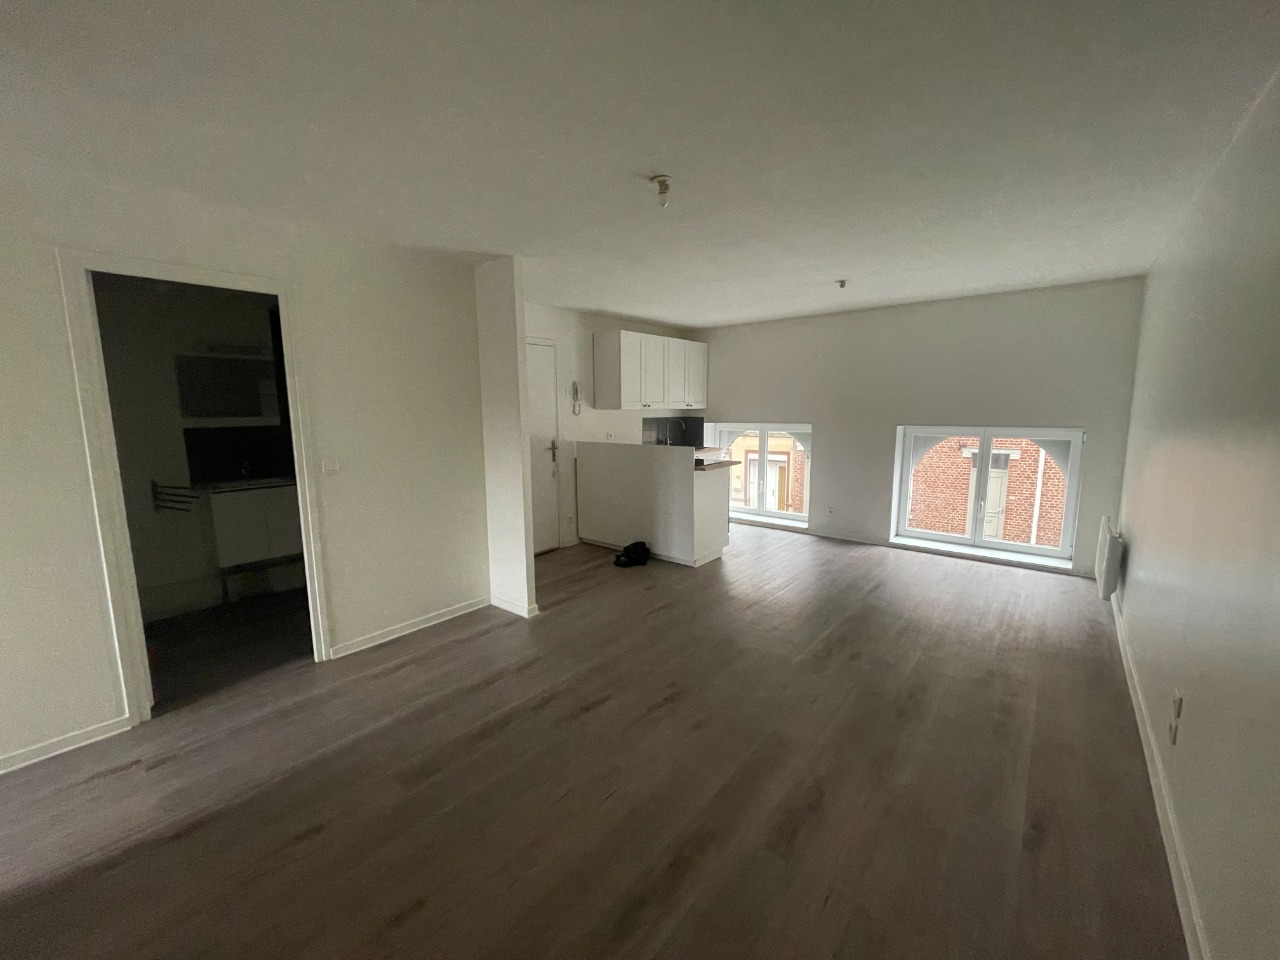 Fournes en weppes type 2 bis Photo 3 - JLW Immobilier